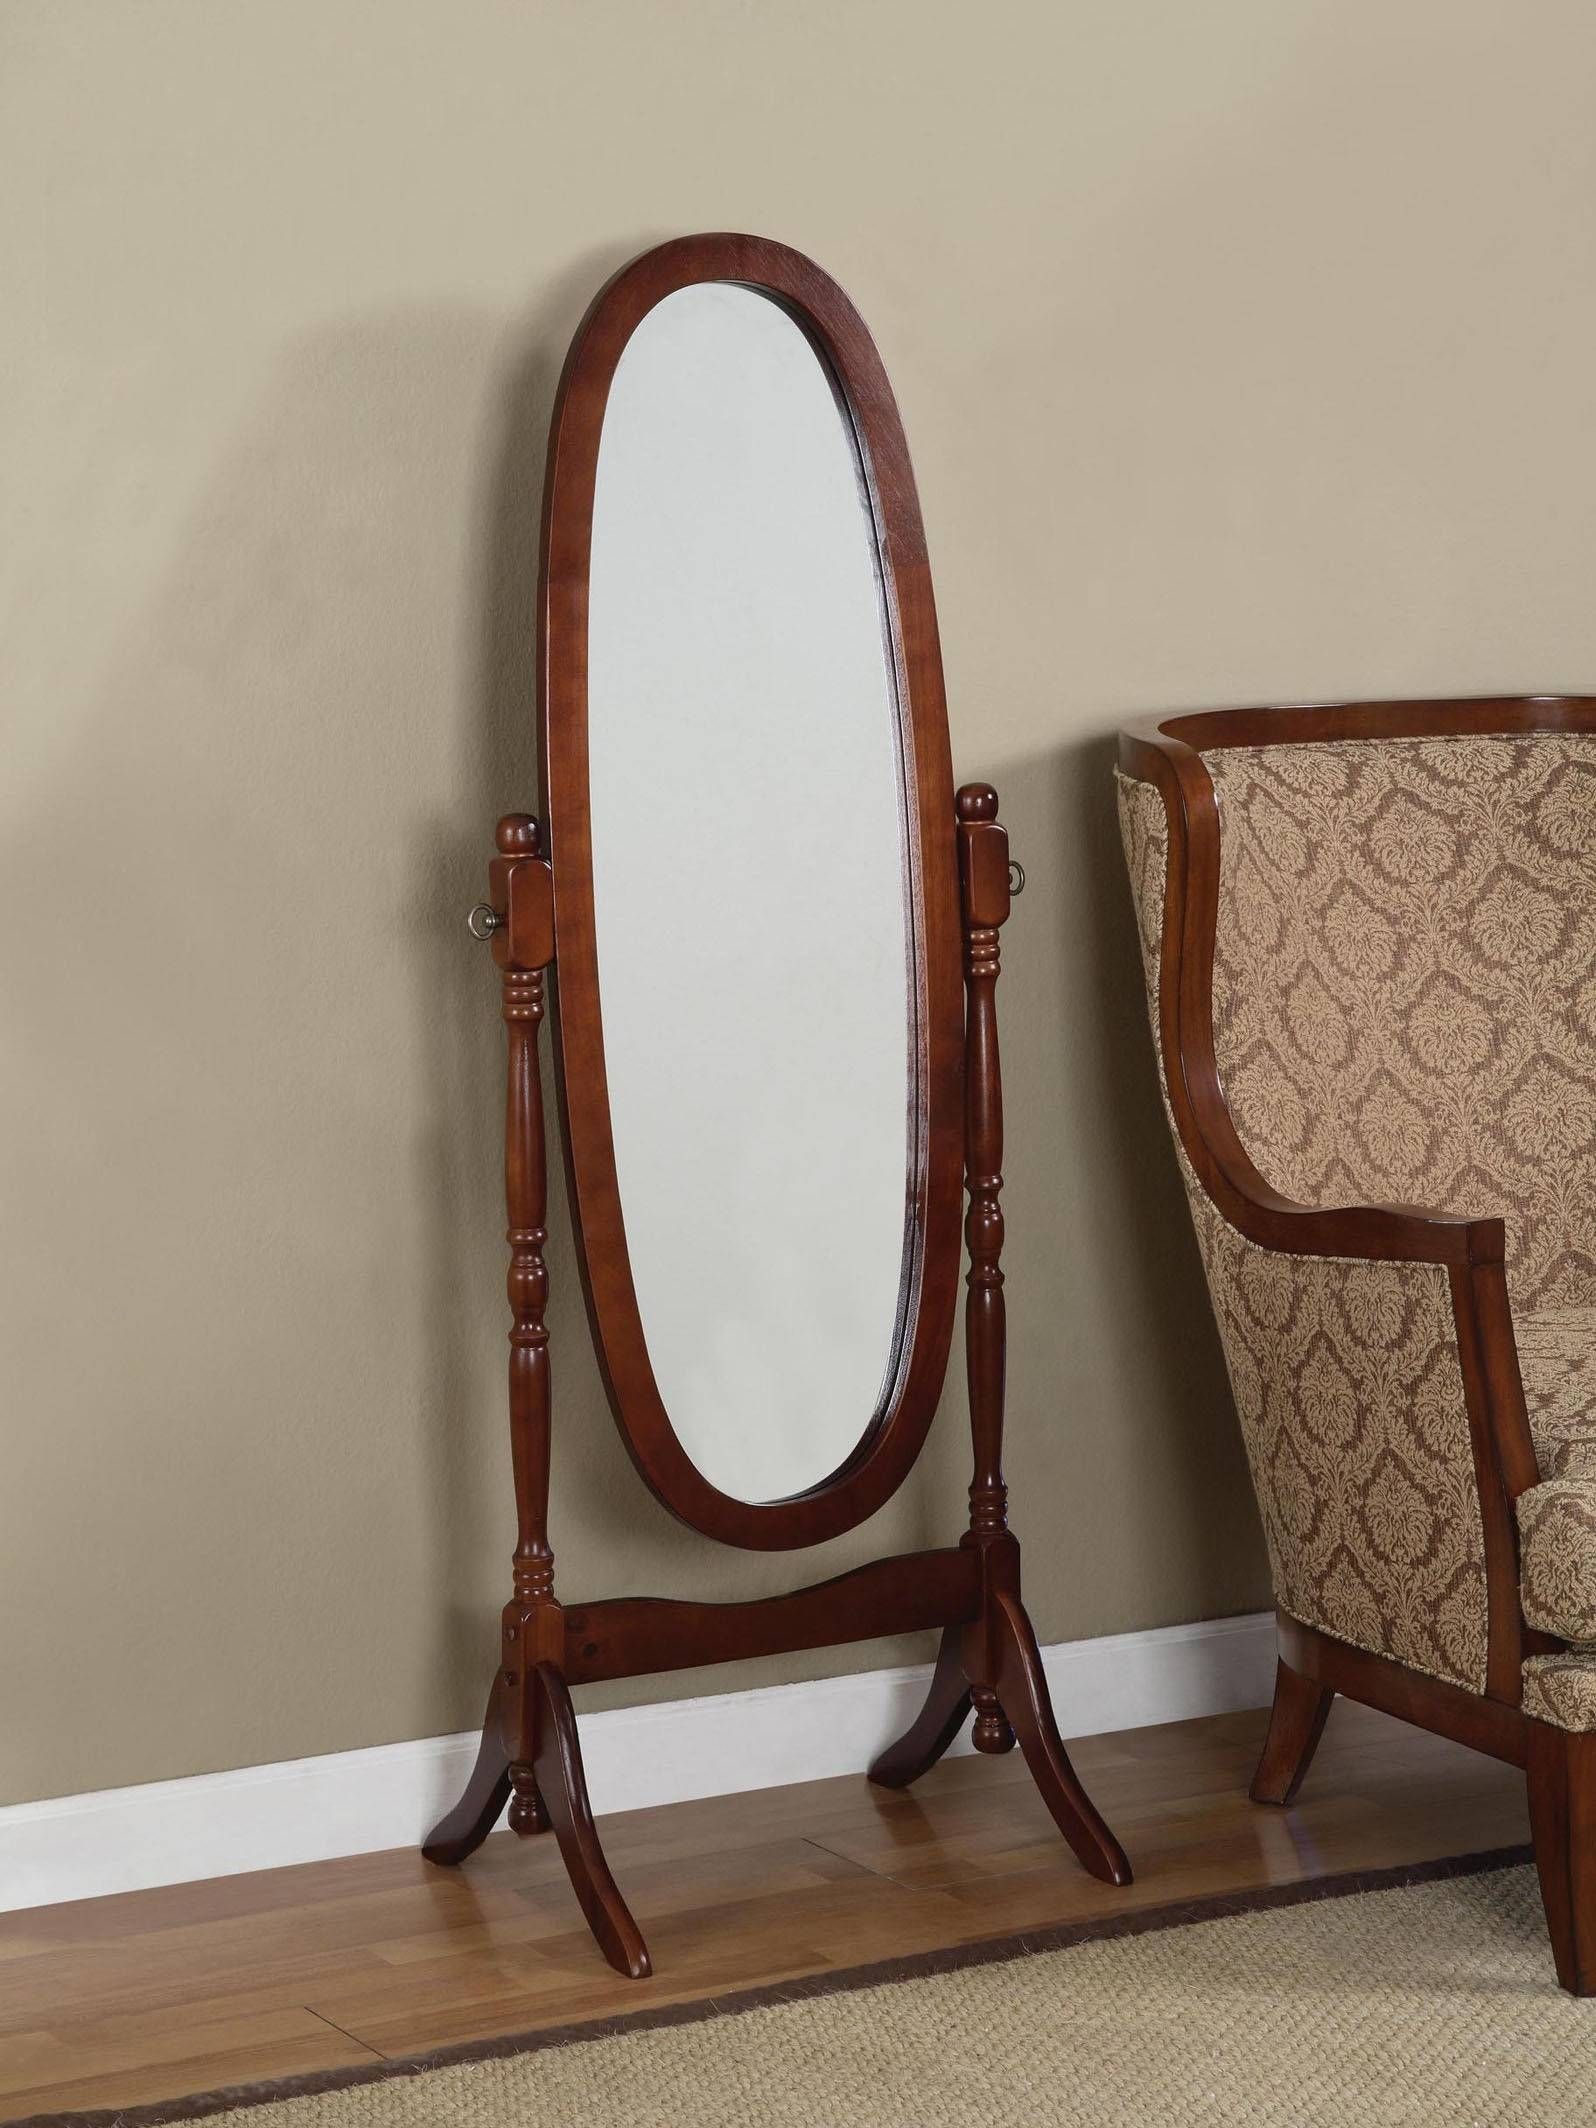 Bedroom Furniture Sets : Small Decorative Mirrors Vintage Mirrors Regarding Full Length Vintage Standing Mirrors (View 25 of 25)